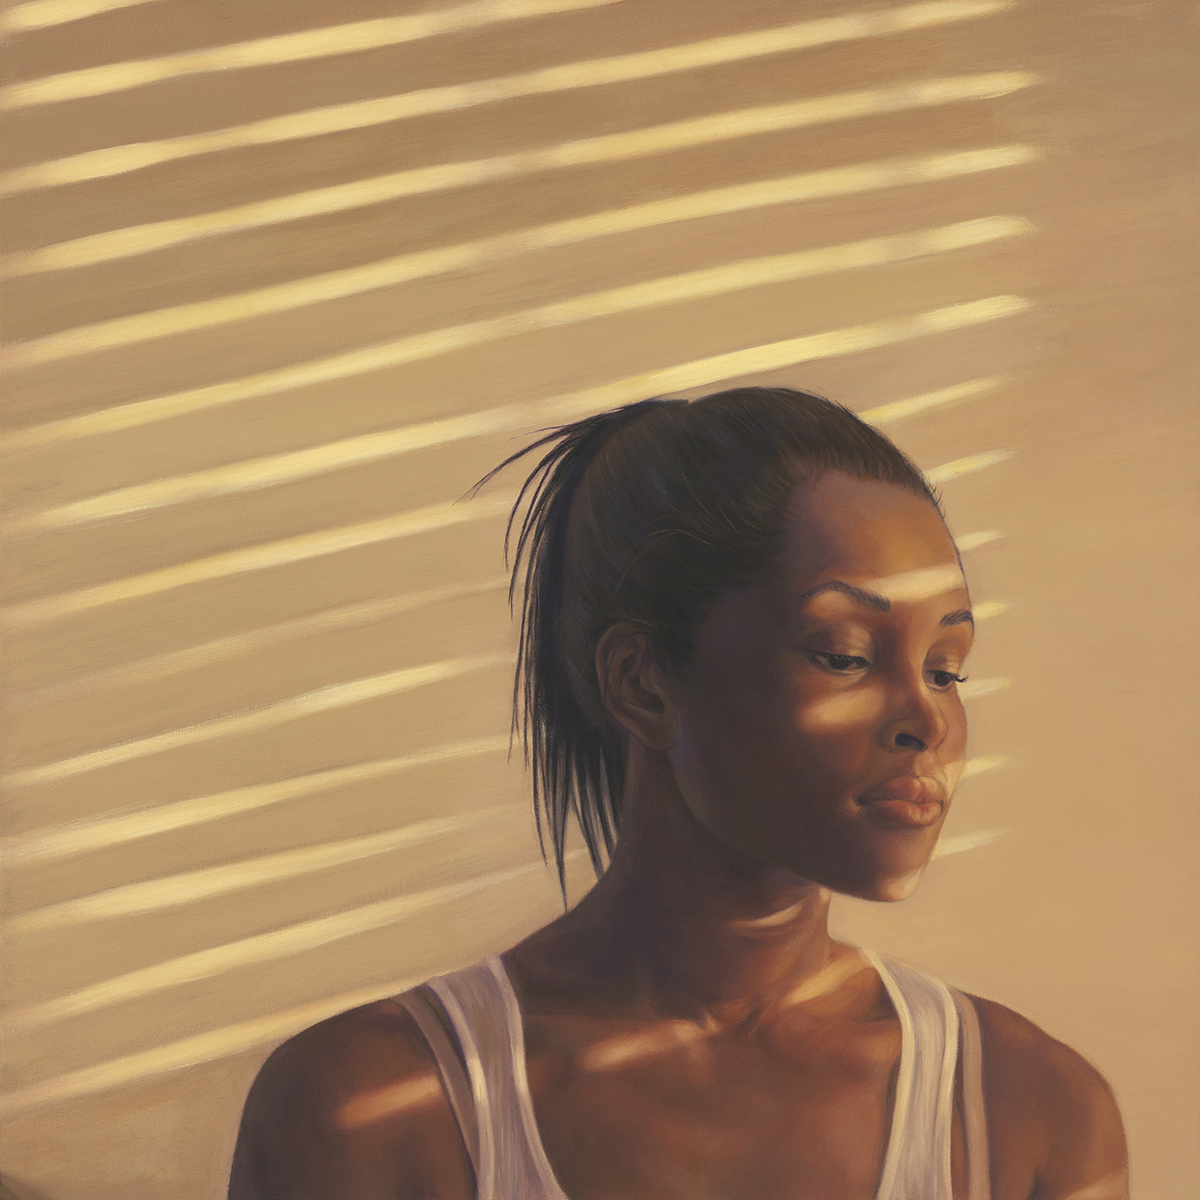 oil painting of woman portrait with light coming through blinds, shining on her body and background